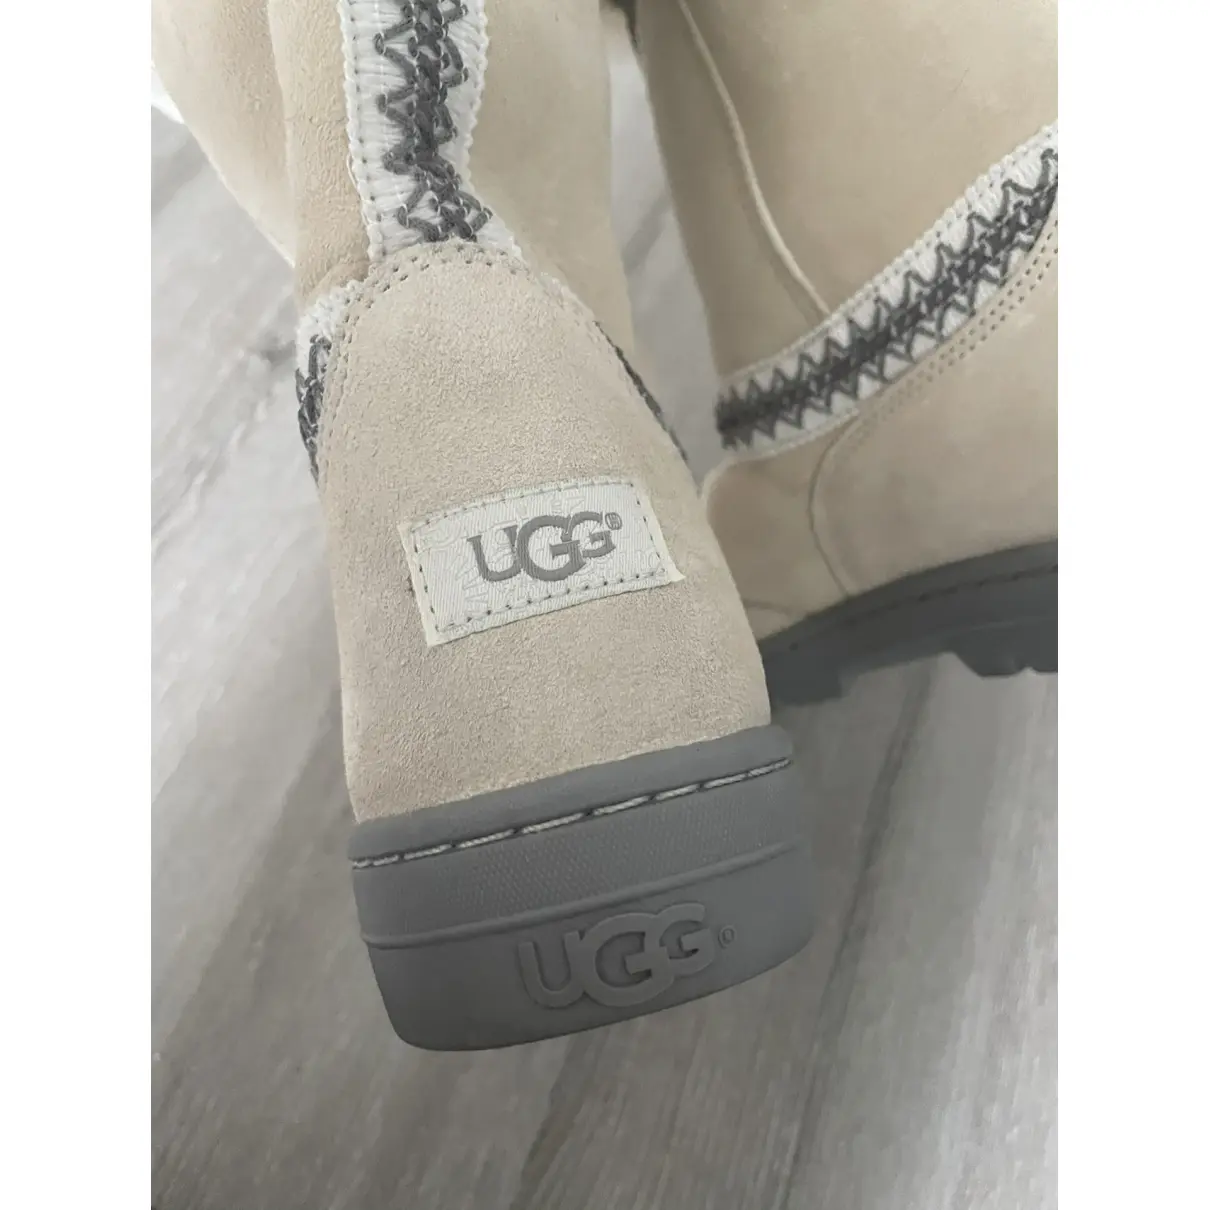 Buy Ugg Leather boots online